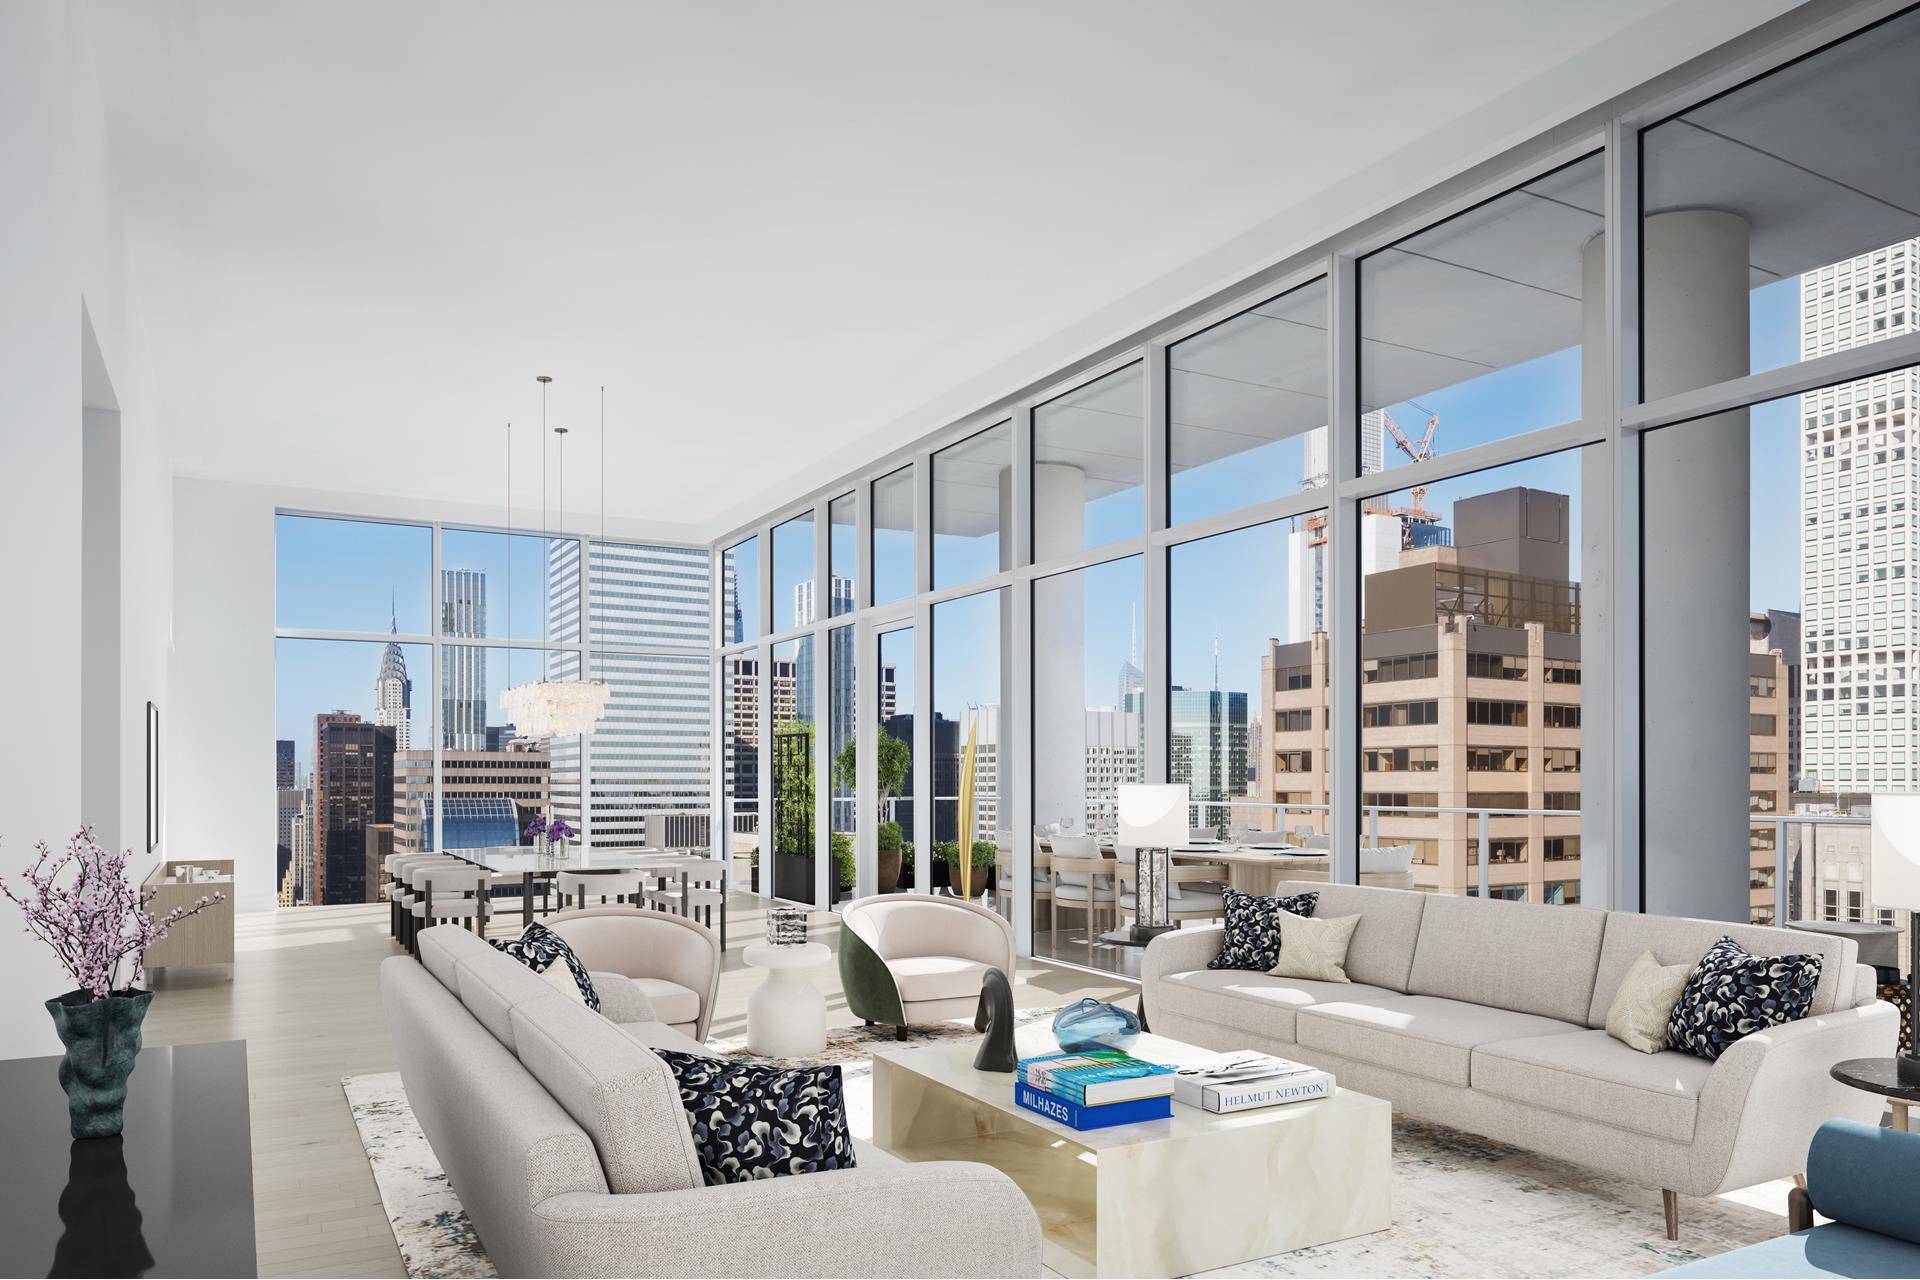 Introducing Penthouse 33, an unparalleled, three bedroom, three and a half bath full floor residence with 14' finished ceilings, gas fireplace, and 148 linear feet of continuous terrace with 360 ...